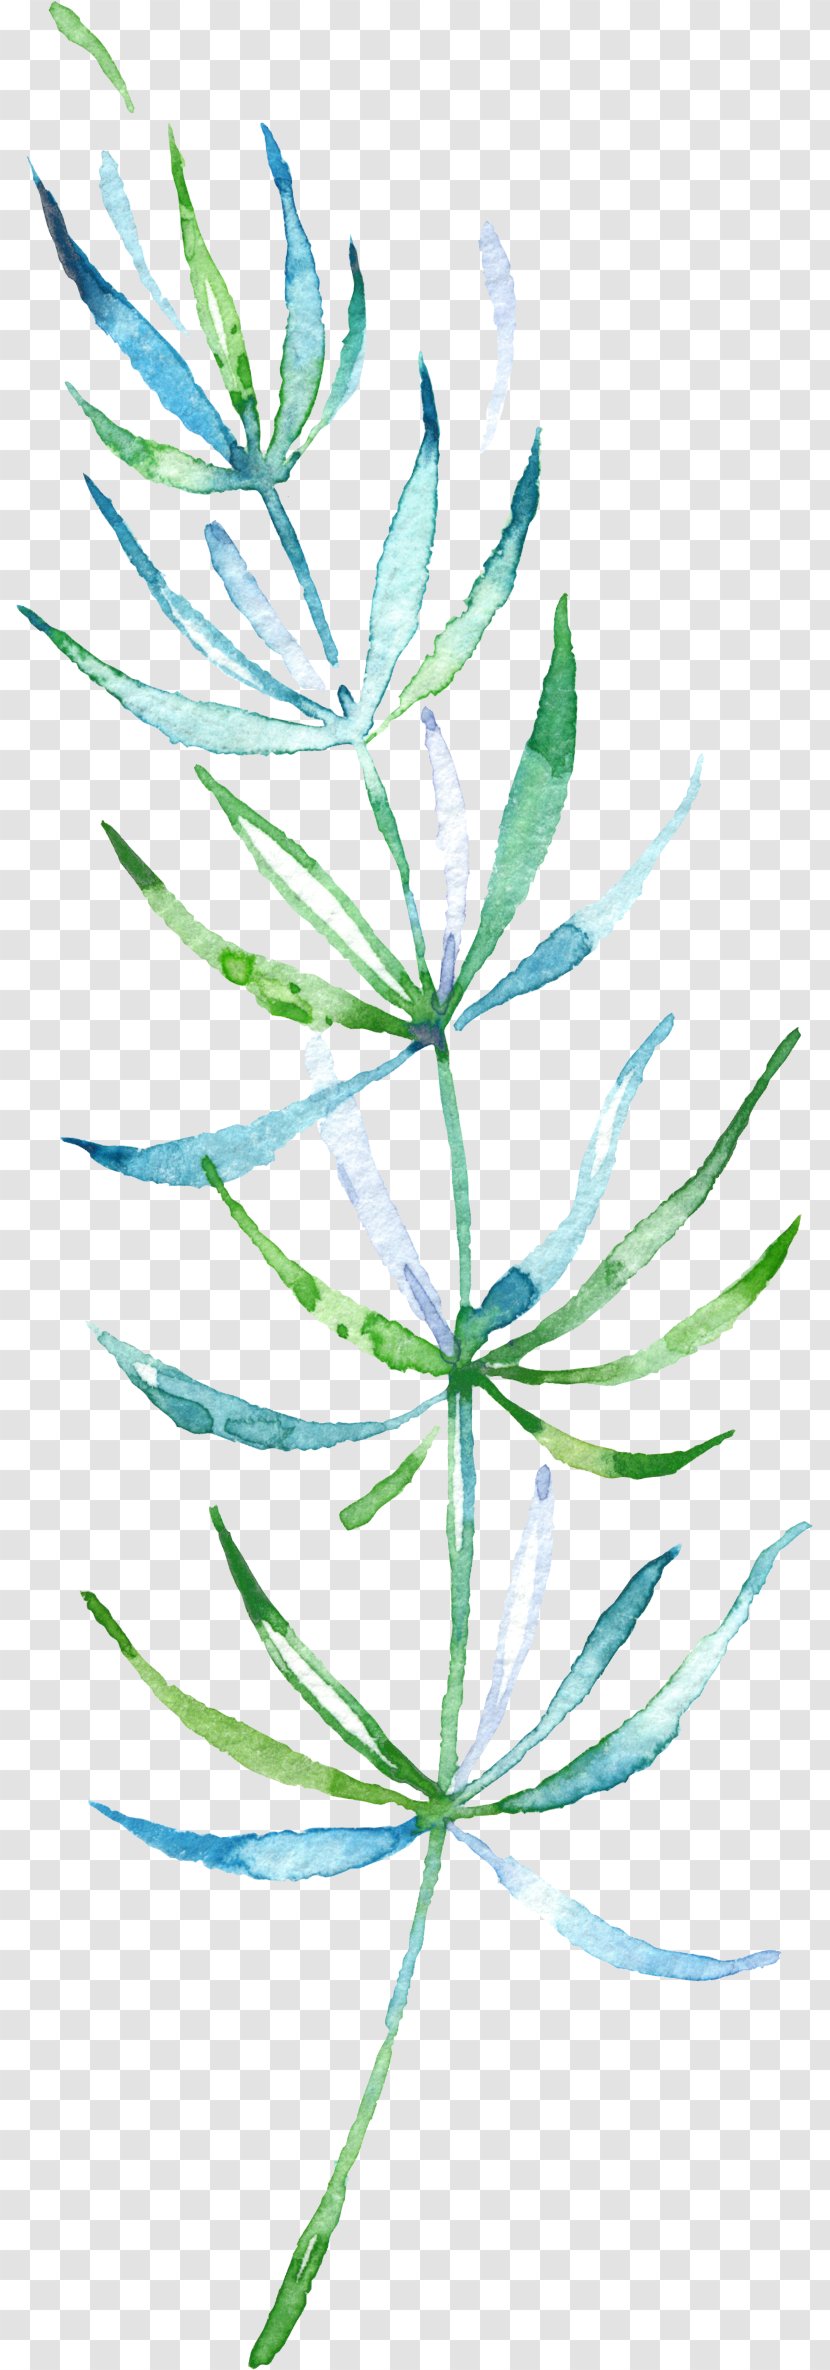 Watercolor Painting Leaf Download - Drawing Plant Transparent PNG